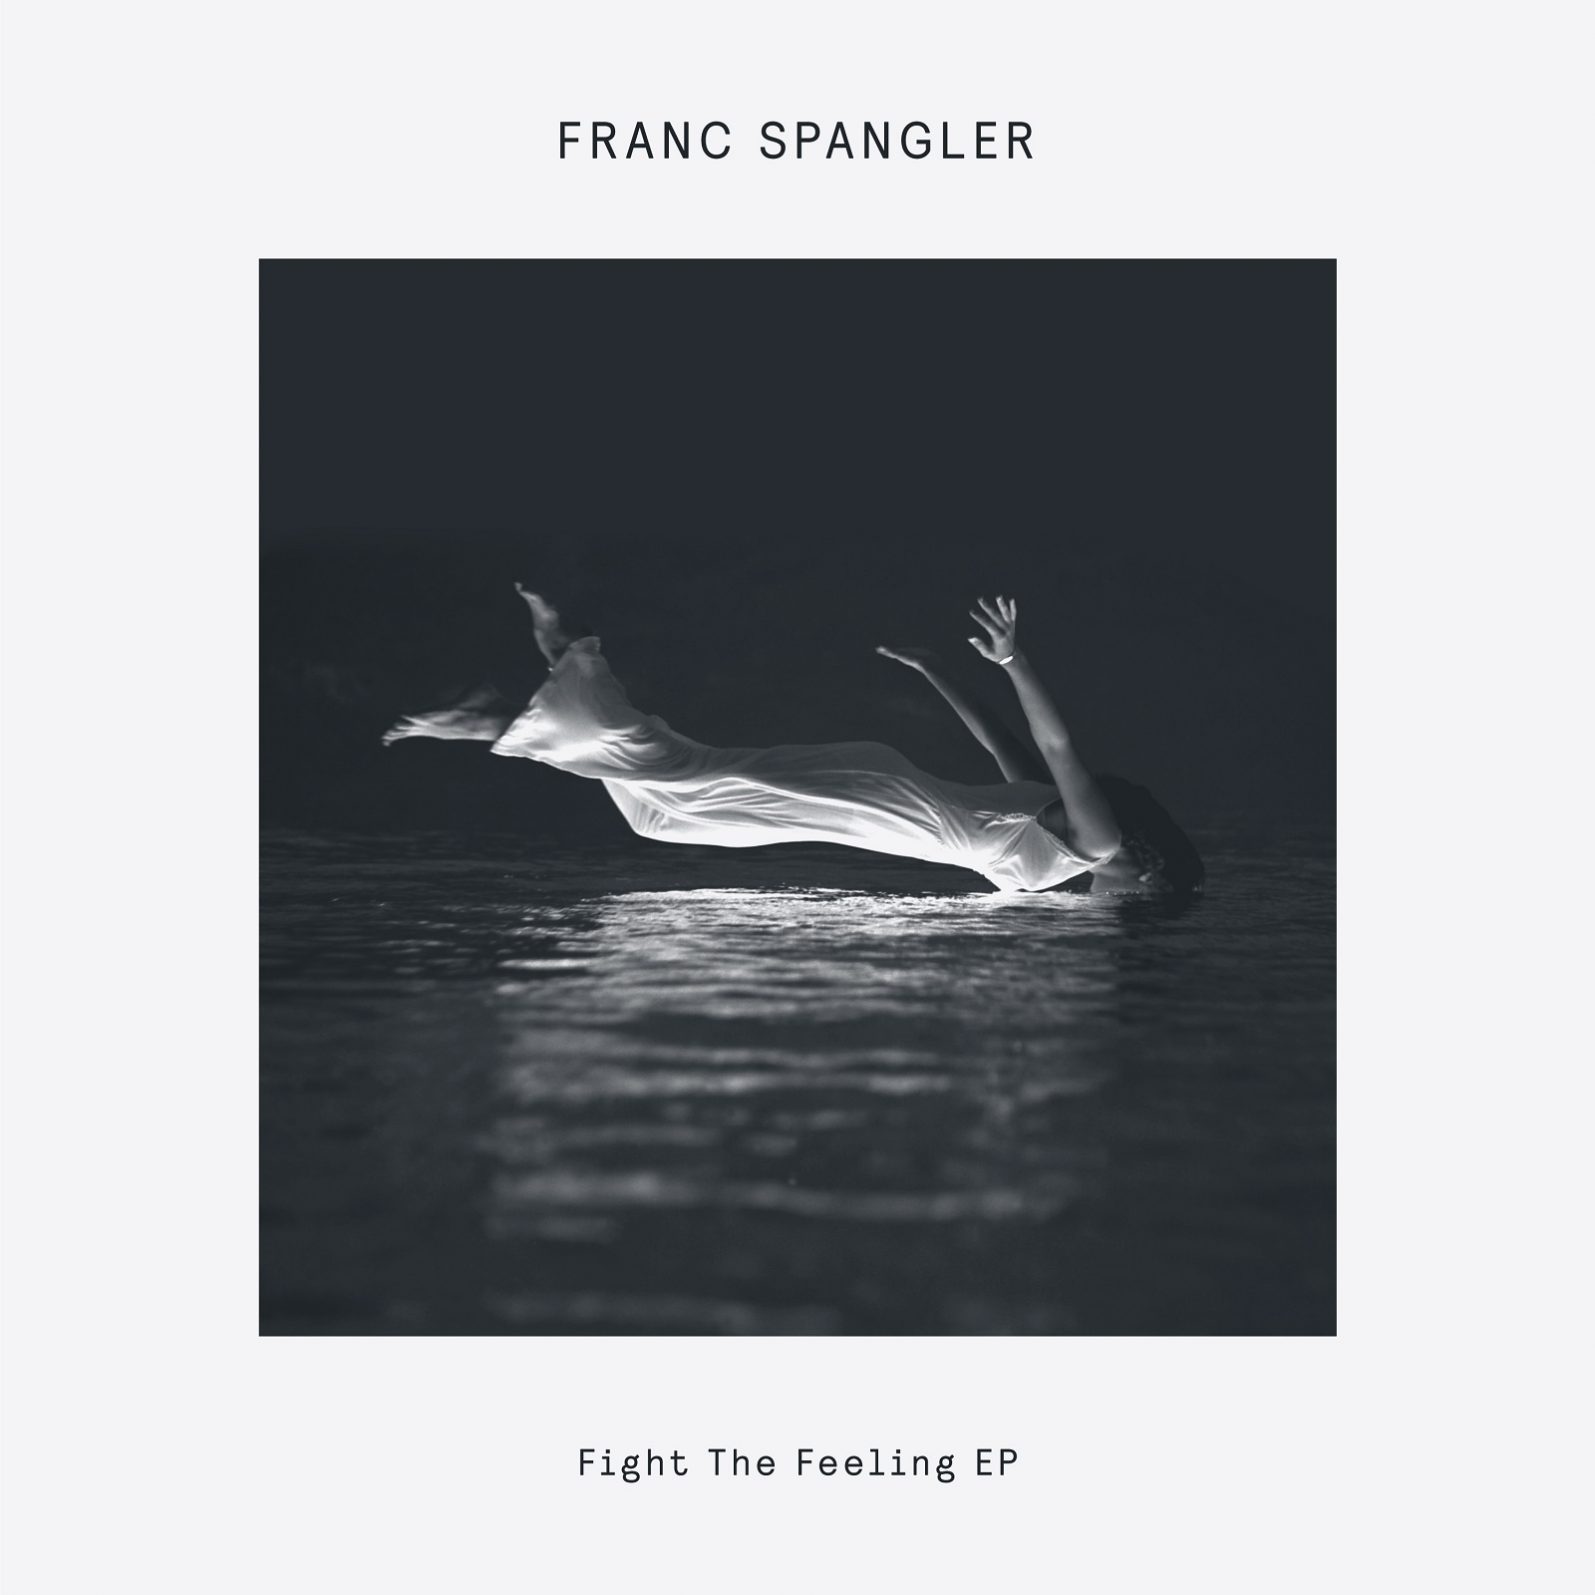 Franc Spangler – Fight The Feeling EP (Delusions of Grandeur)